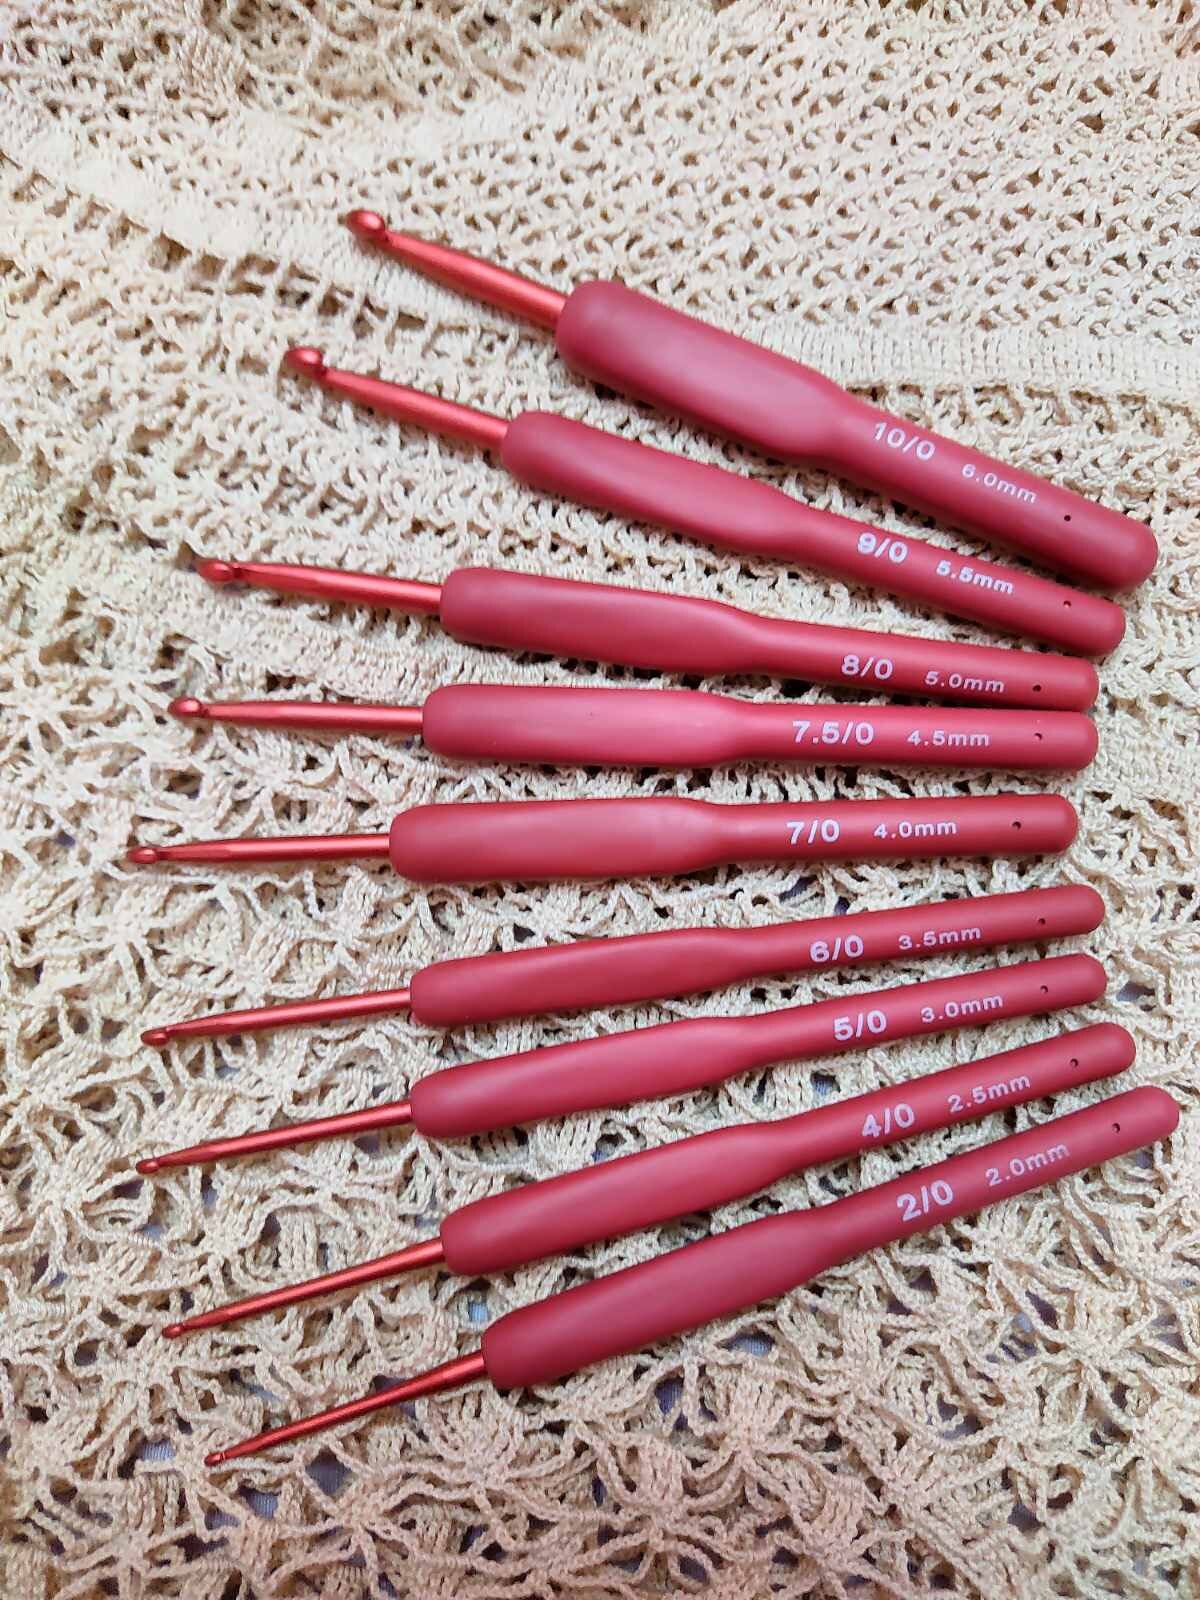 Darcie Crafts Crochet Hook Set Easy Grip With Flat Finger 14cm in Organiser  Box 9pc 2mm, 2.5mm, 3mm, 3.5mm, 4mm, 4.5mm, 5mm, 5.5mm and 6mm 